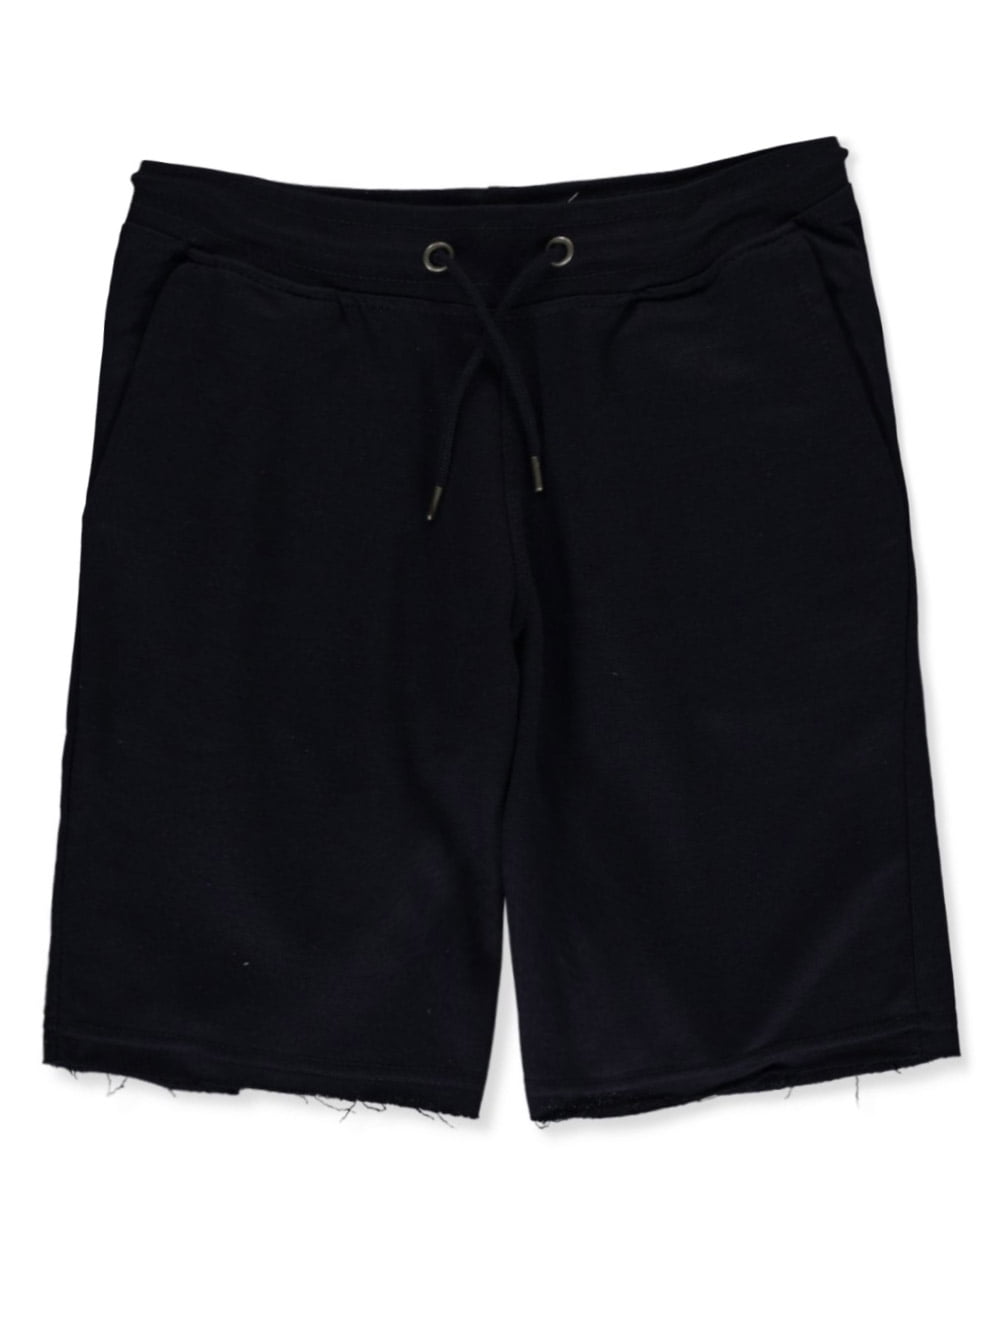 Evolution In Design Boys' Cut-Off Terry Shorts - black, 2t (Toddler ...